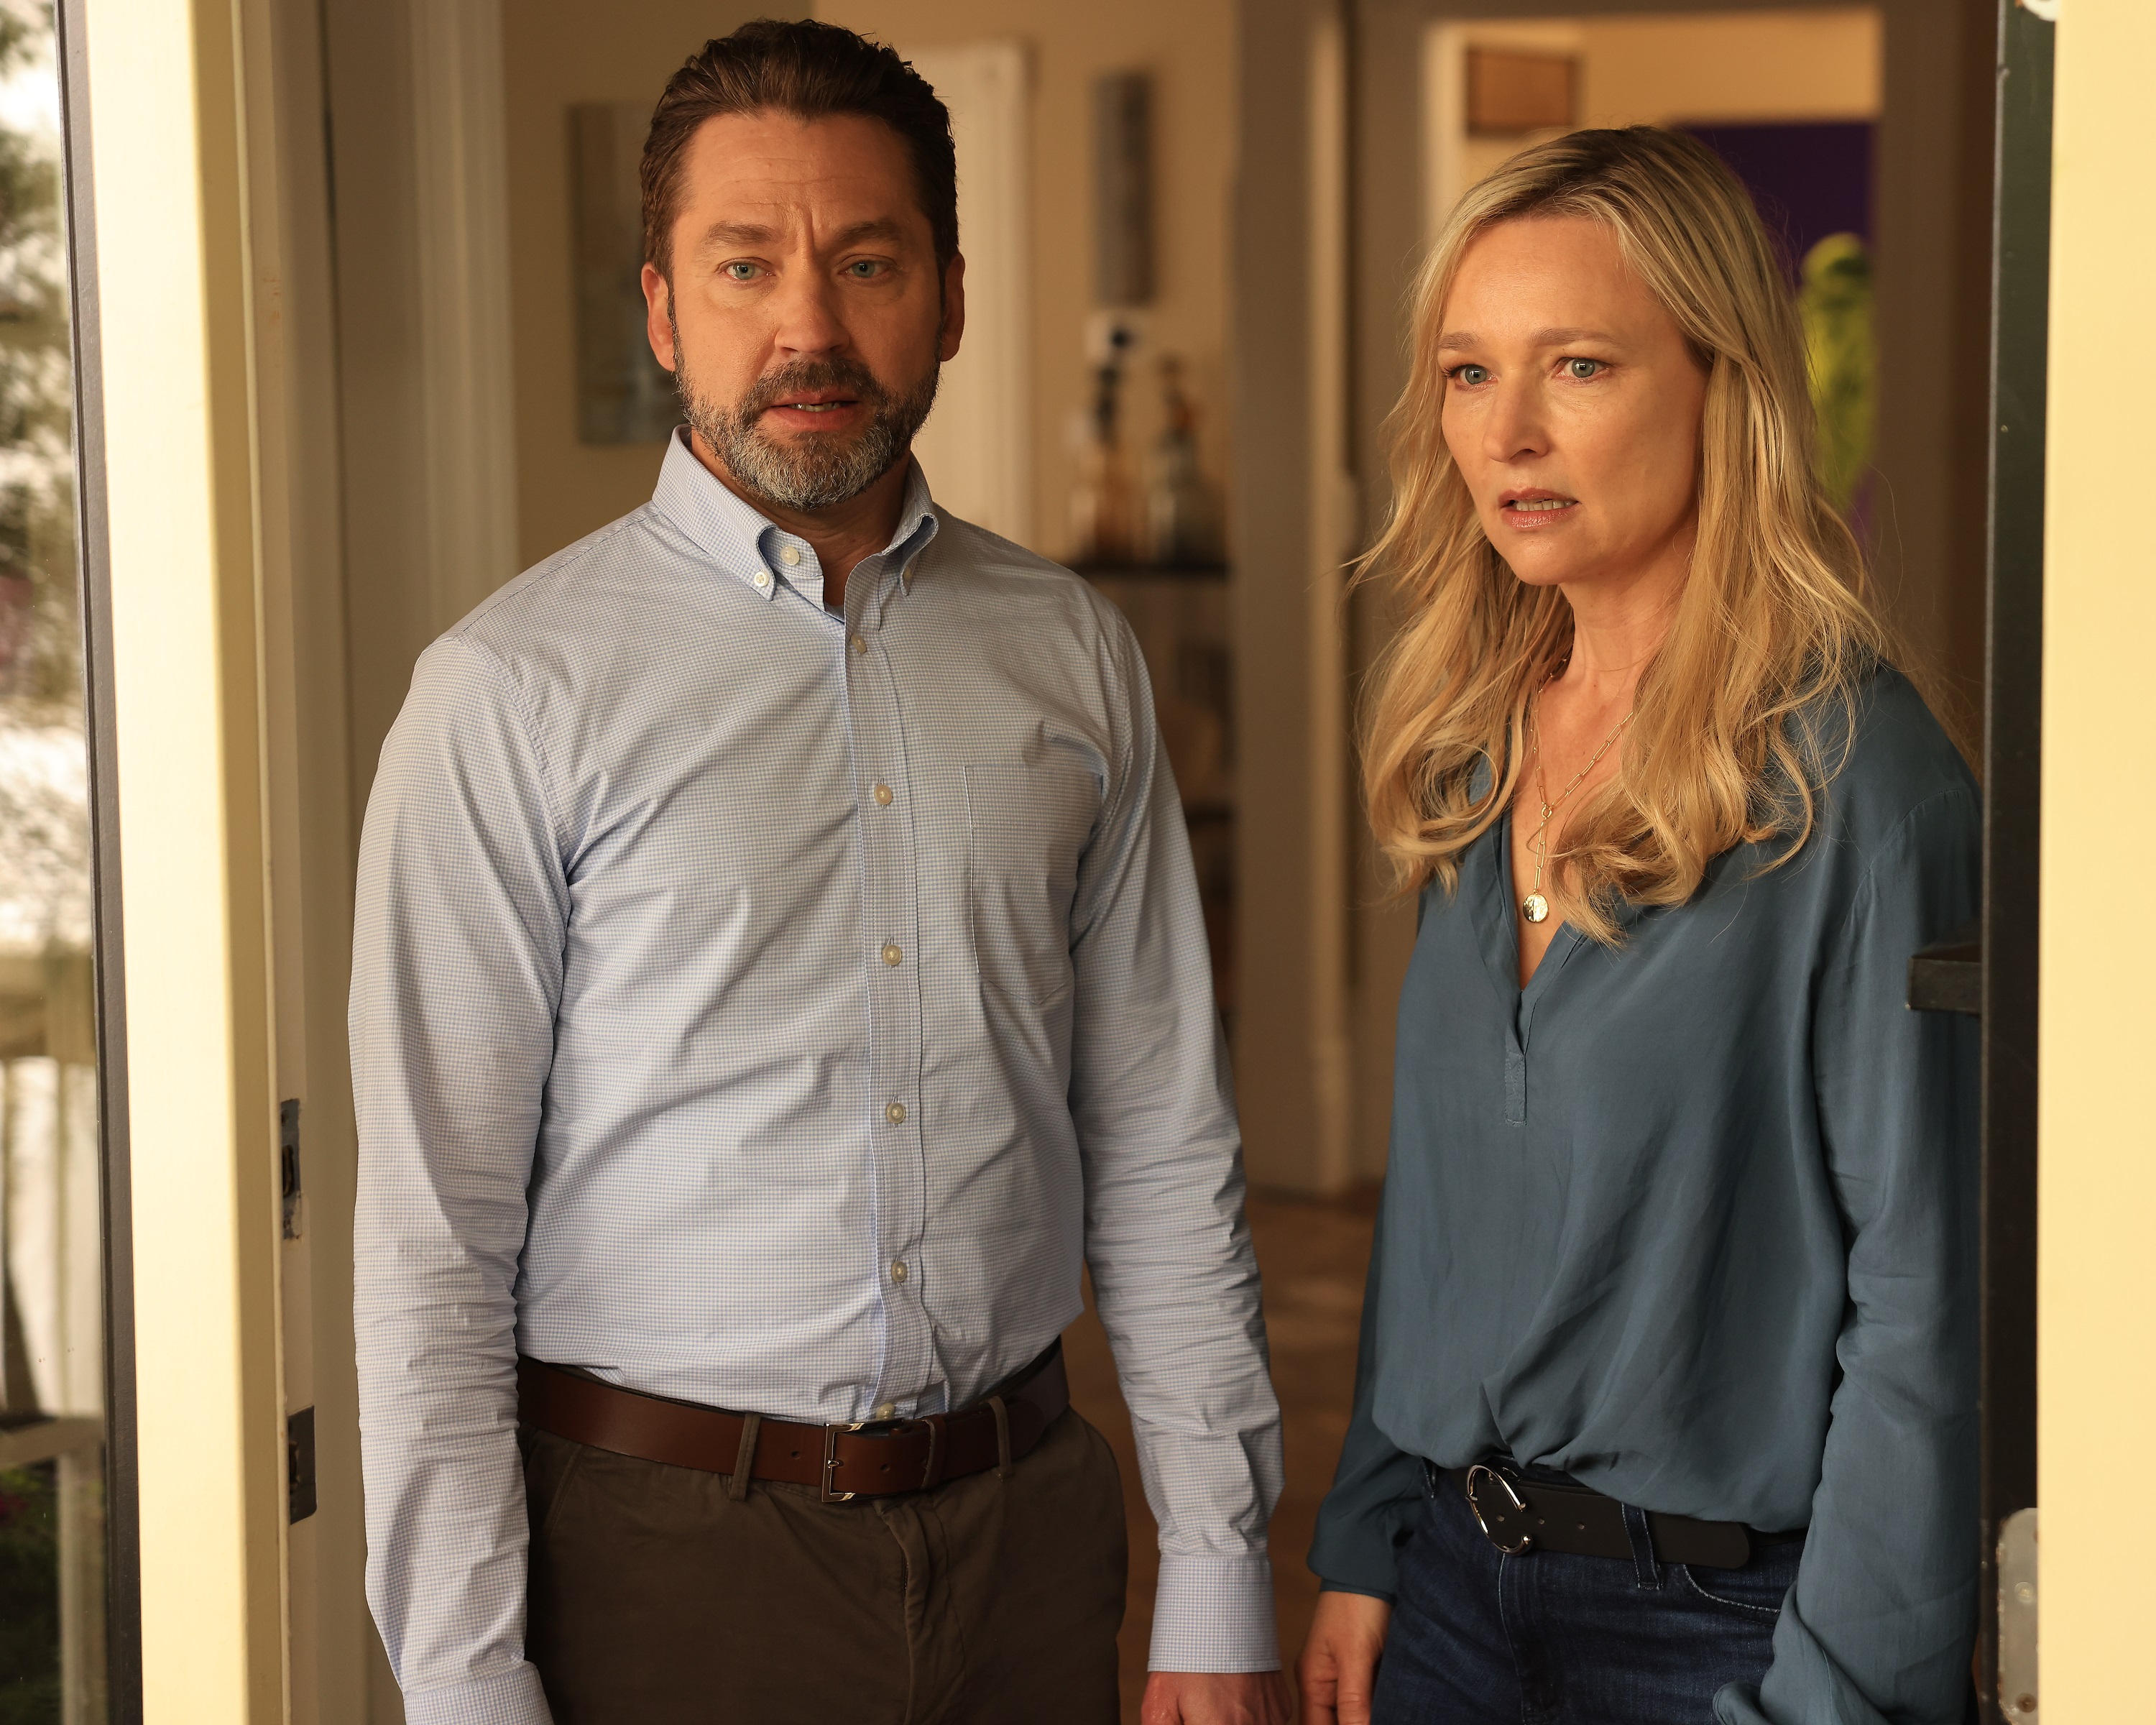 Michael Weston and Kari Matchett acting as Layla Gregory's parents in 'A Million Little Things'